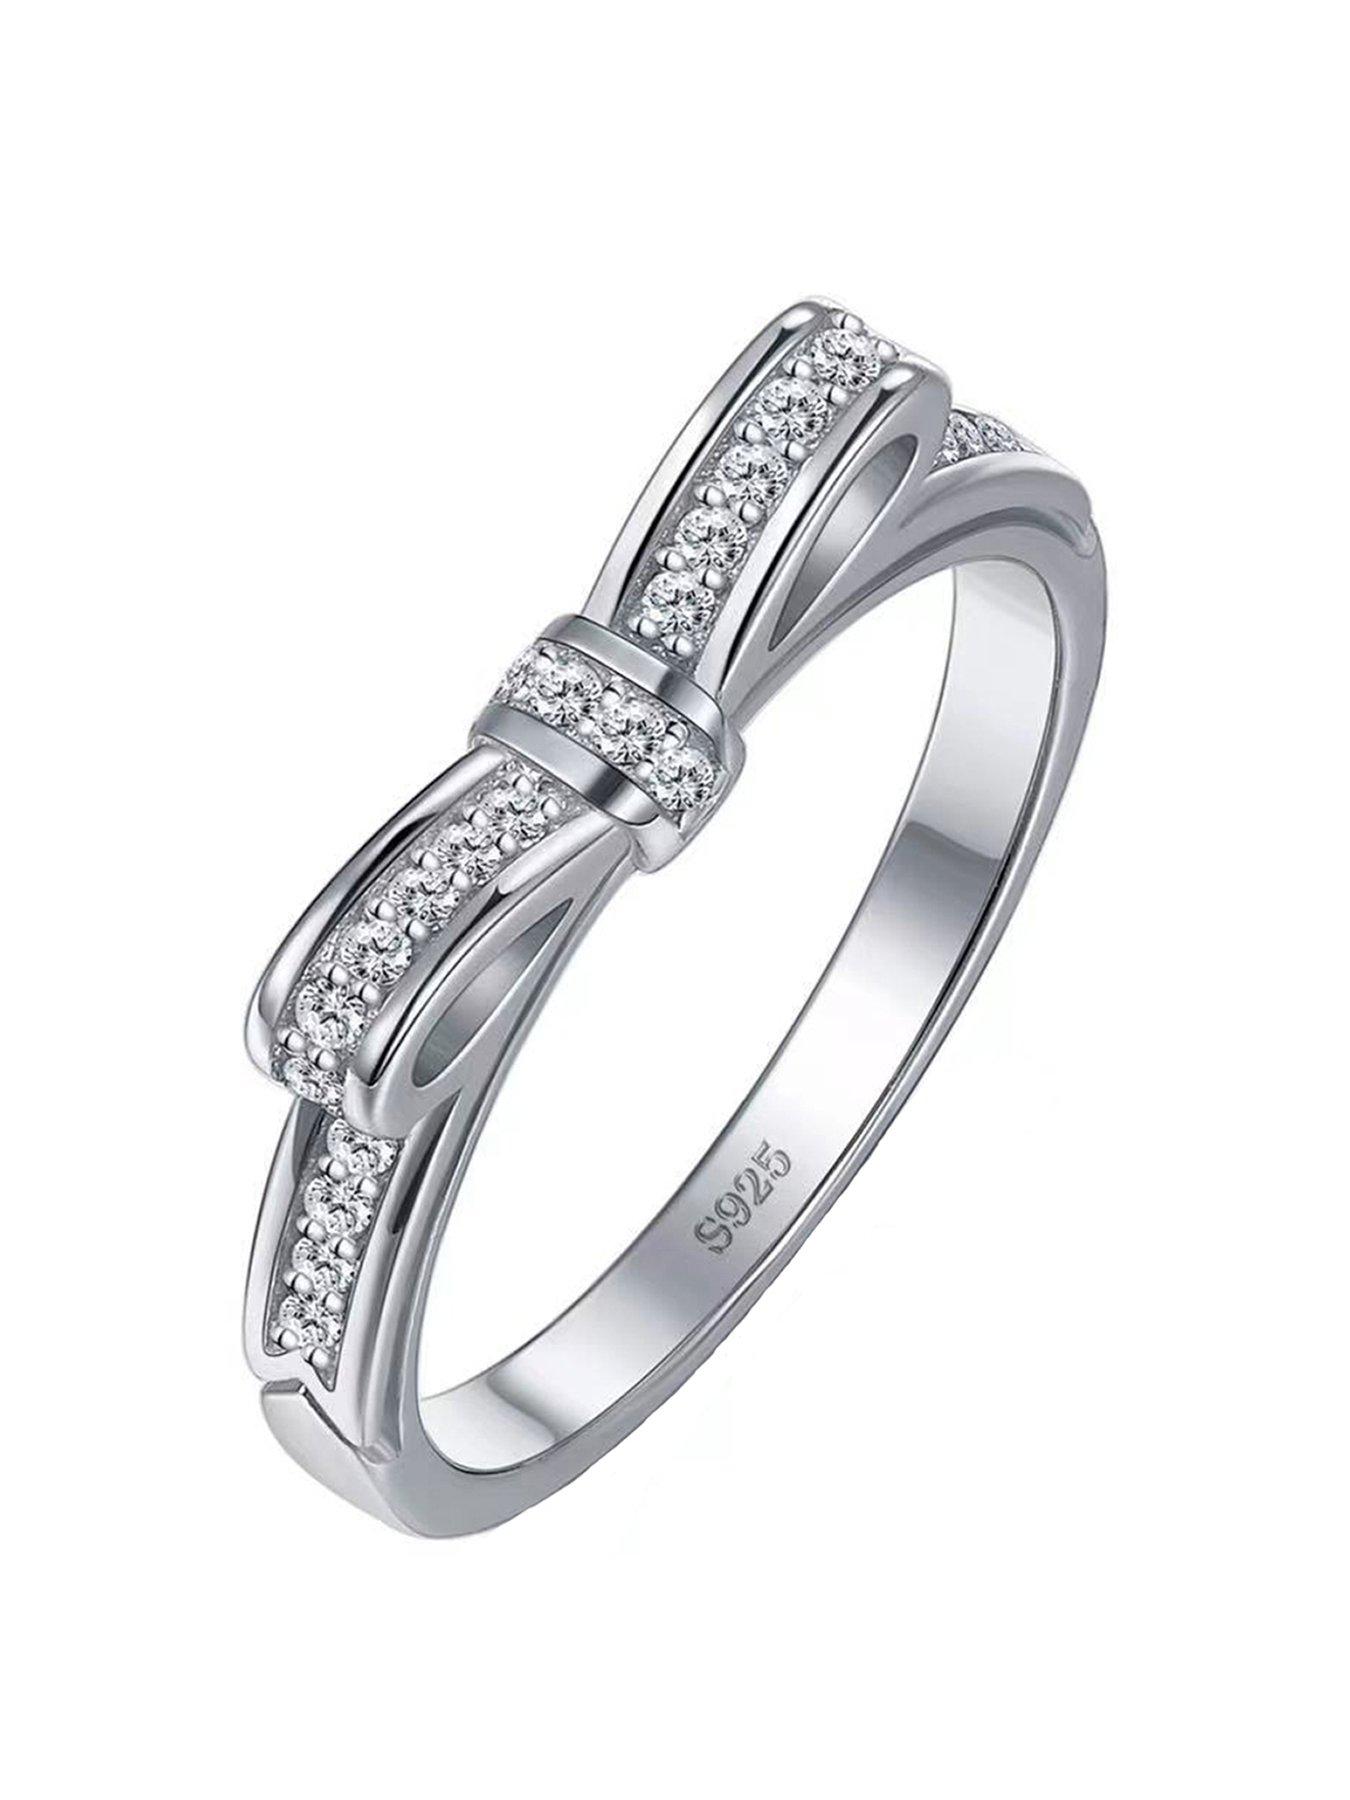 Oval cubic zirconia ring for ladies